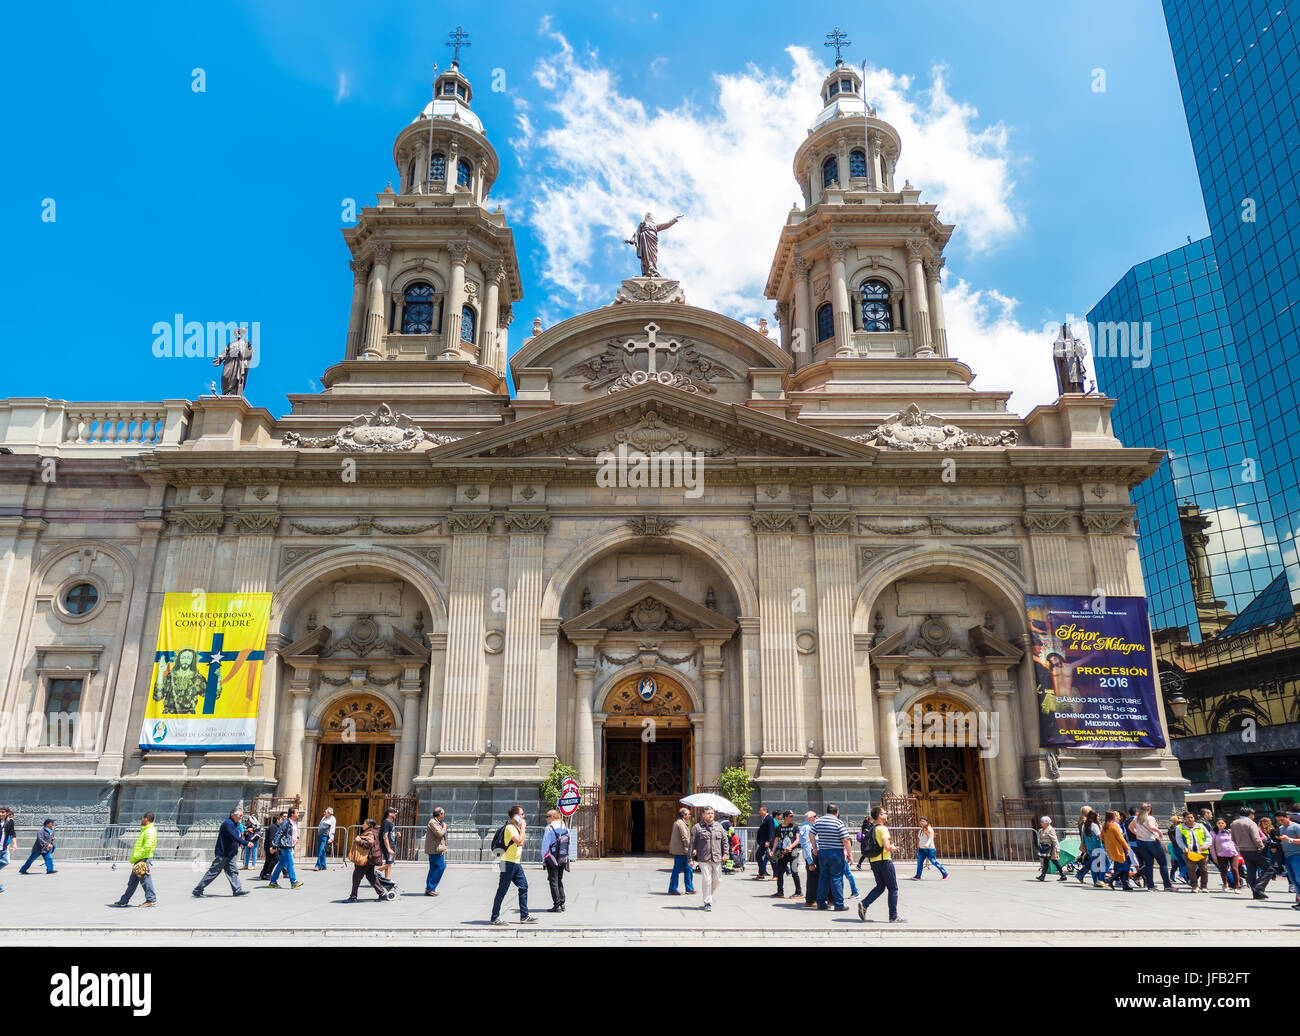 SANTIAGO, CHILE - OCTOBER 23, 2016: People on Plaza de Armas in front of Santiago Metropolitan Cathedral. This is the main sguare of the city, surroun Stock Photo